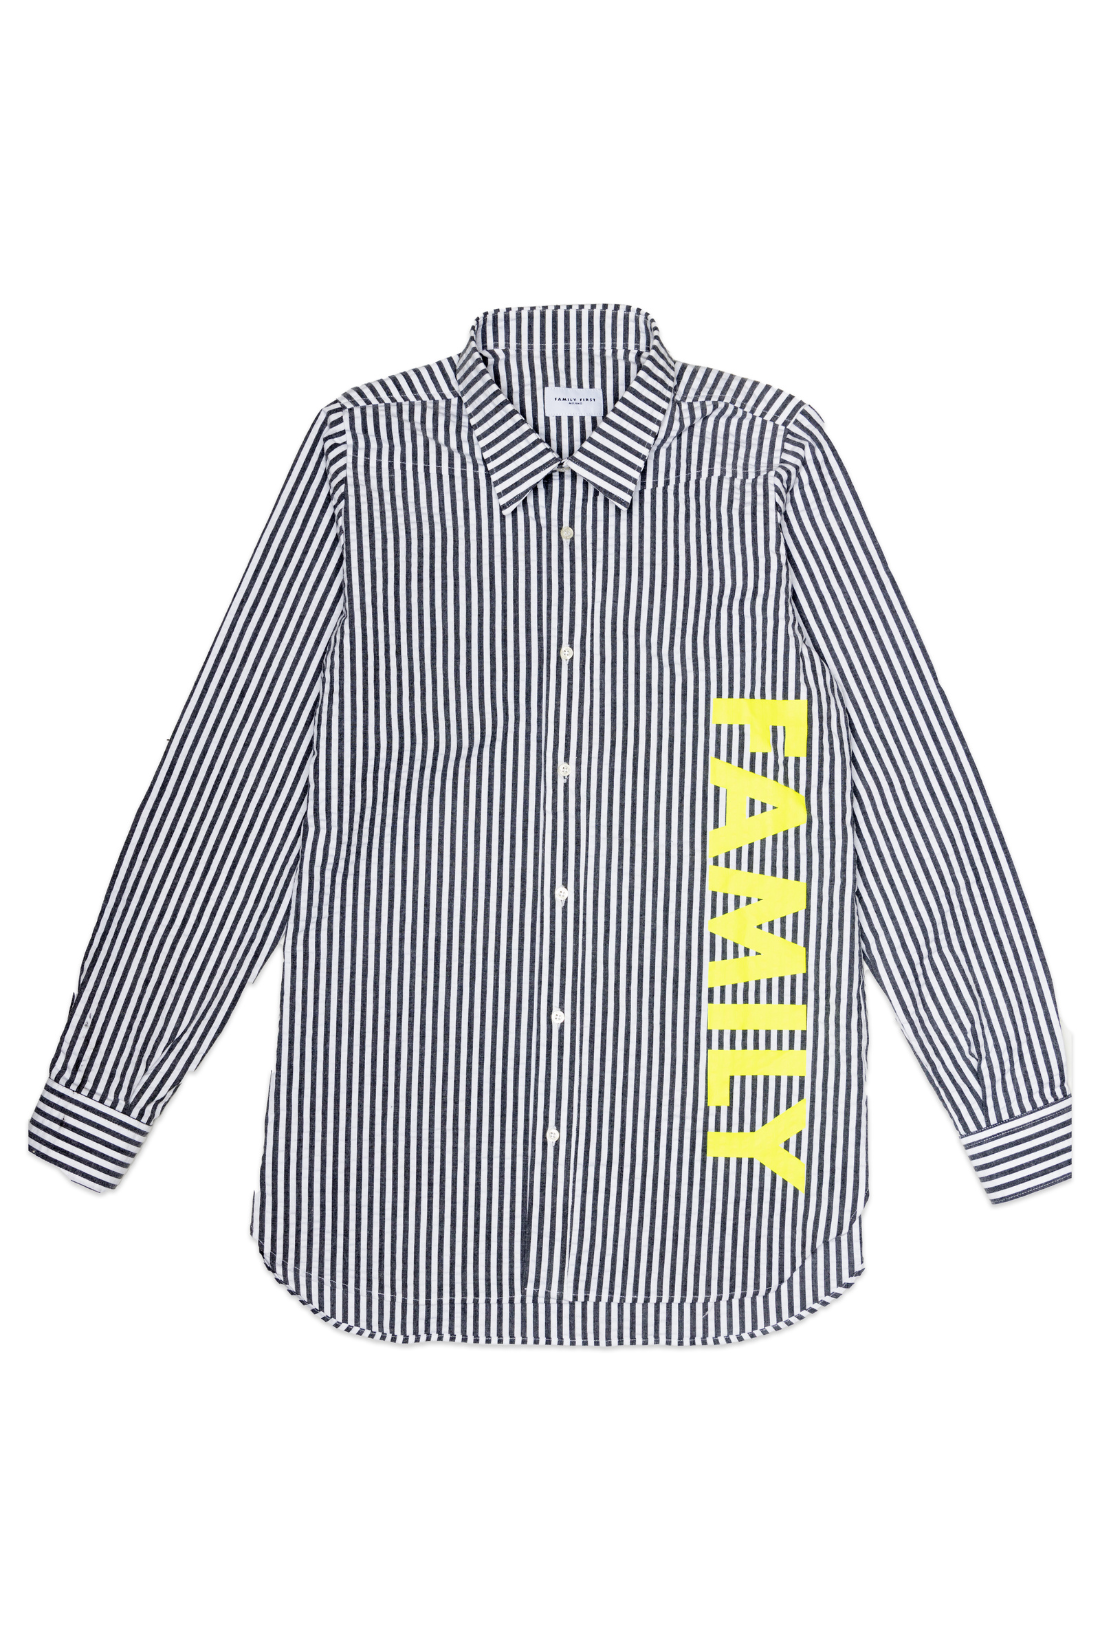 FAMILY STRIPED BUTTON UP GREEN